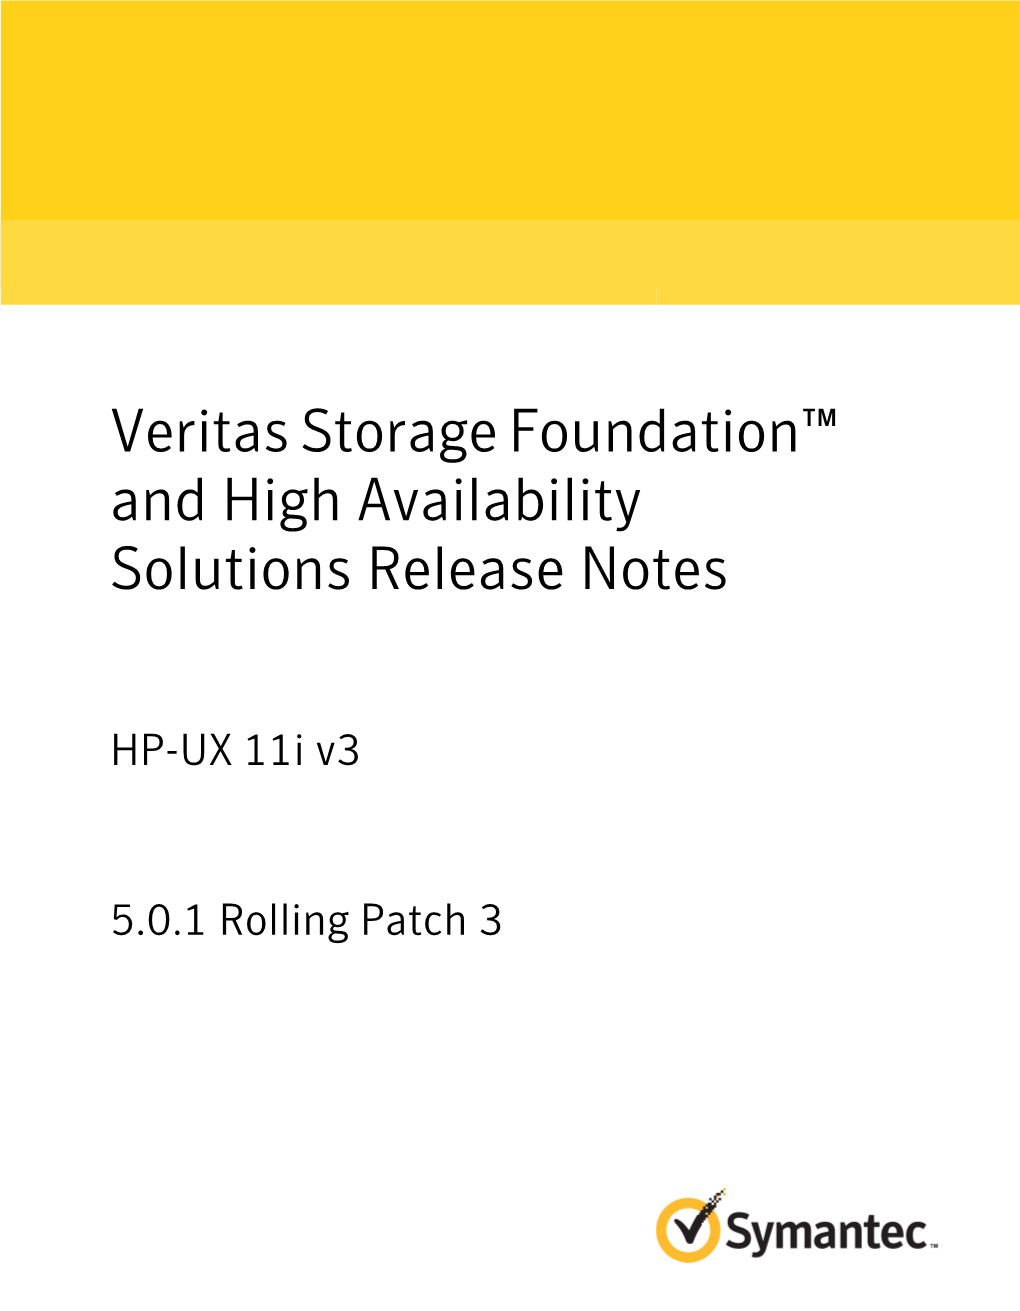 Veritas Storage Foundation™ and High Availability Solutions Release Notes